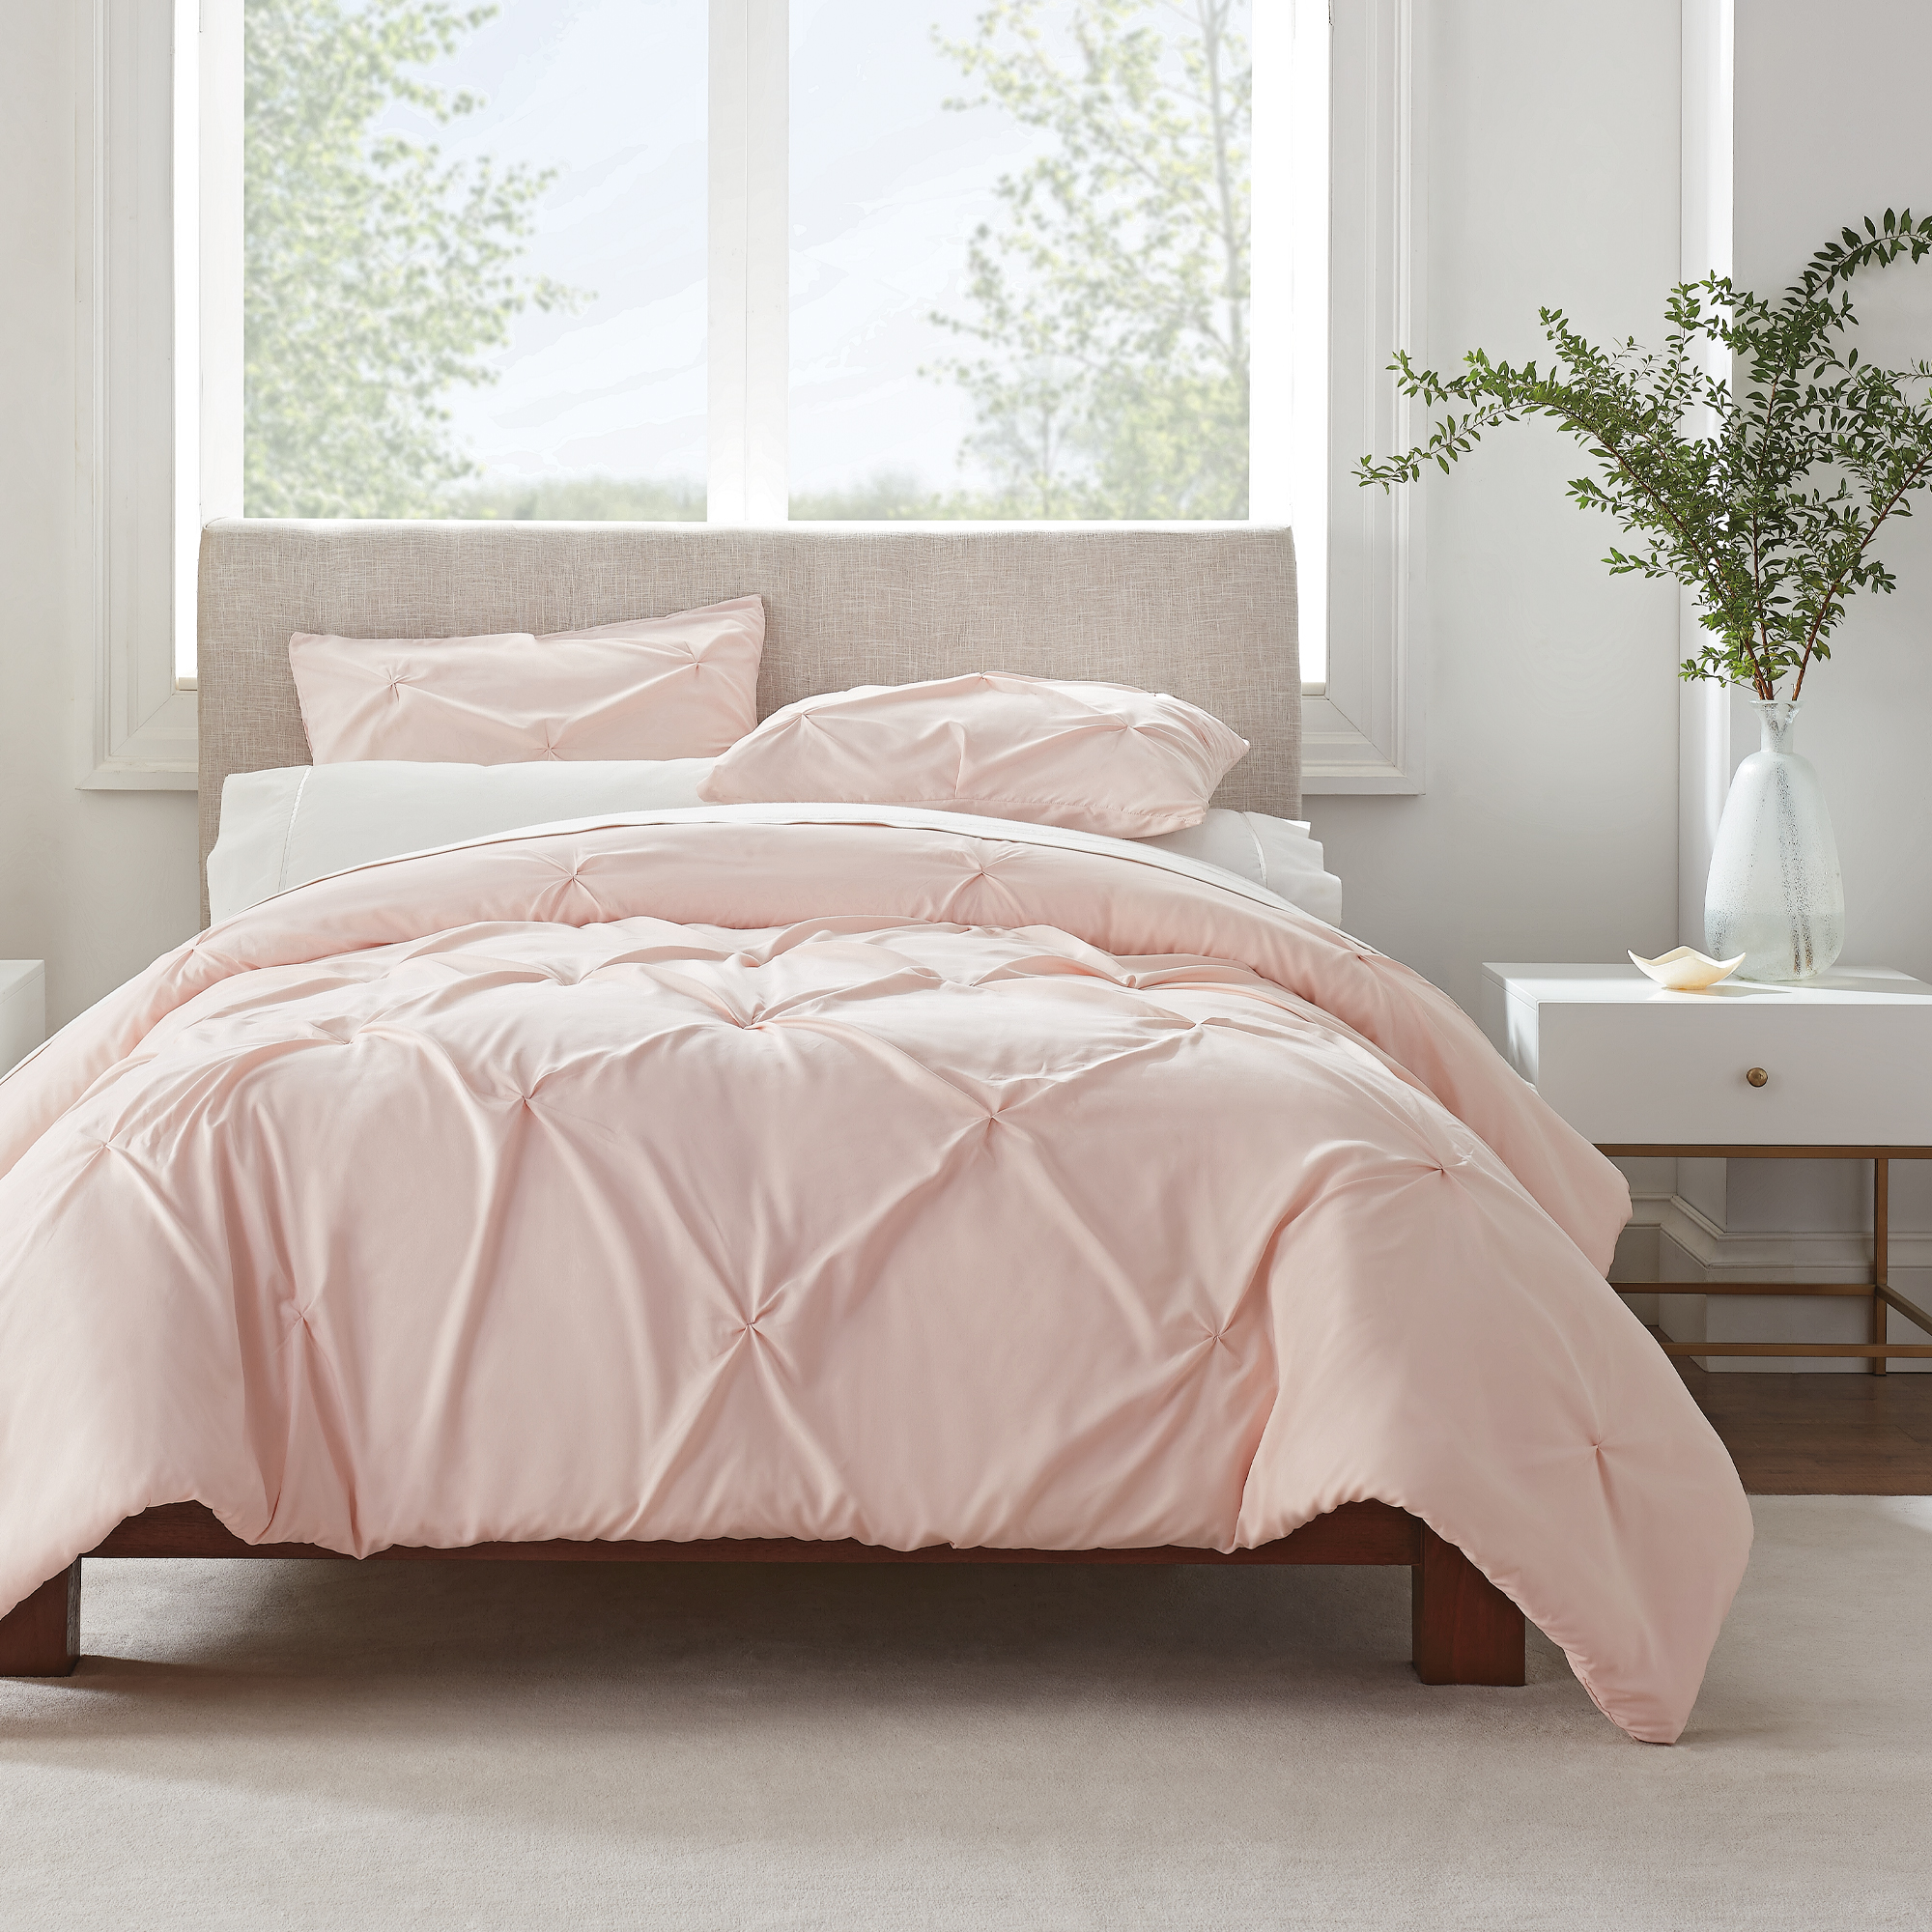 Serta Simply Clean Pleated 3-Piece Solid Duvet Set, Pink, Full/Queen - image 1 of 10